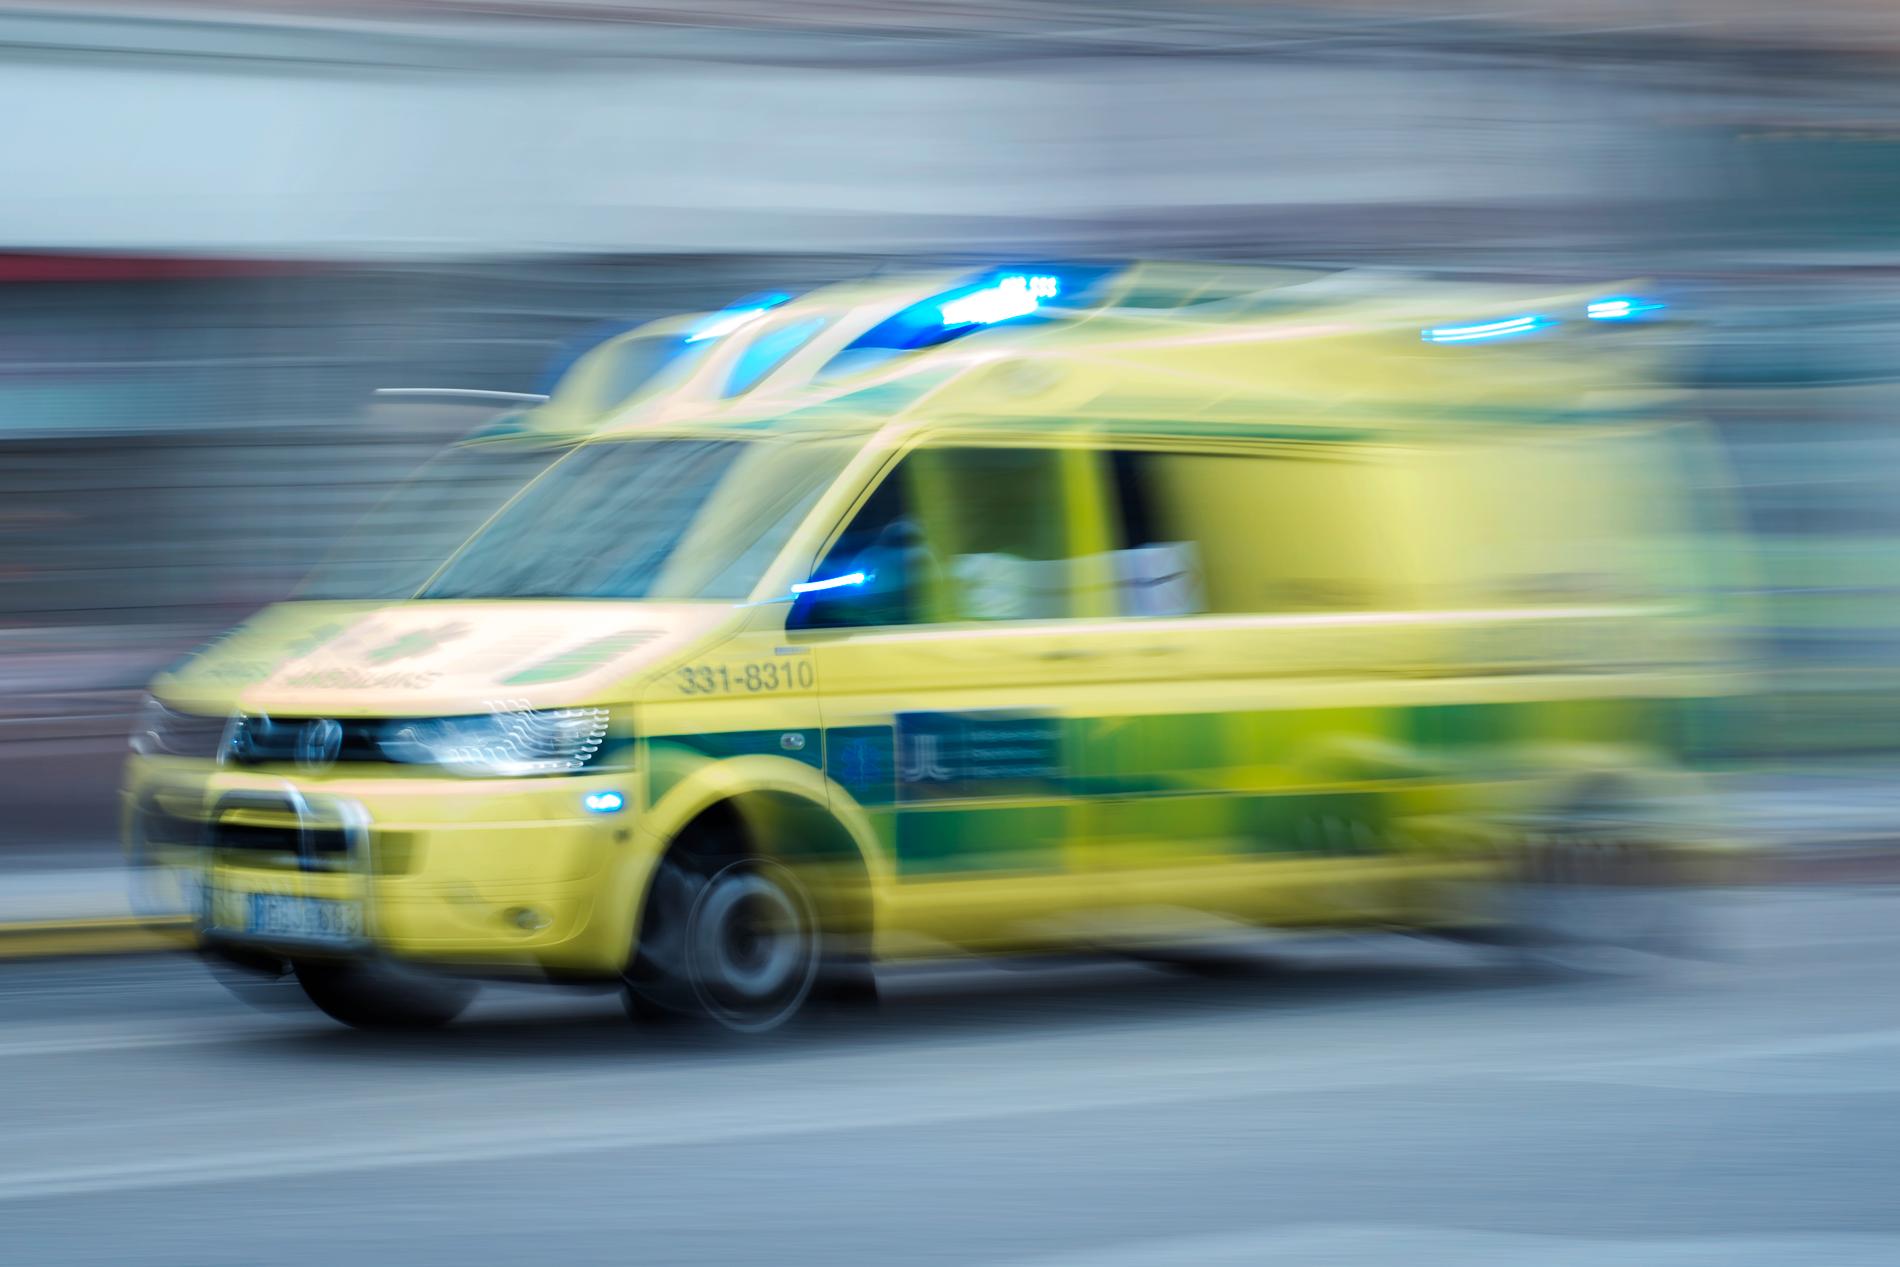 Tragic Workplace Accident in Kungsbacka Claims Young Man’s Life: Sahlgrenska University Hospital Confirms